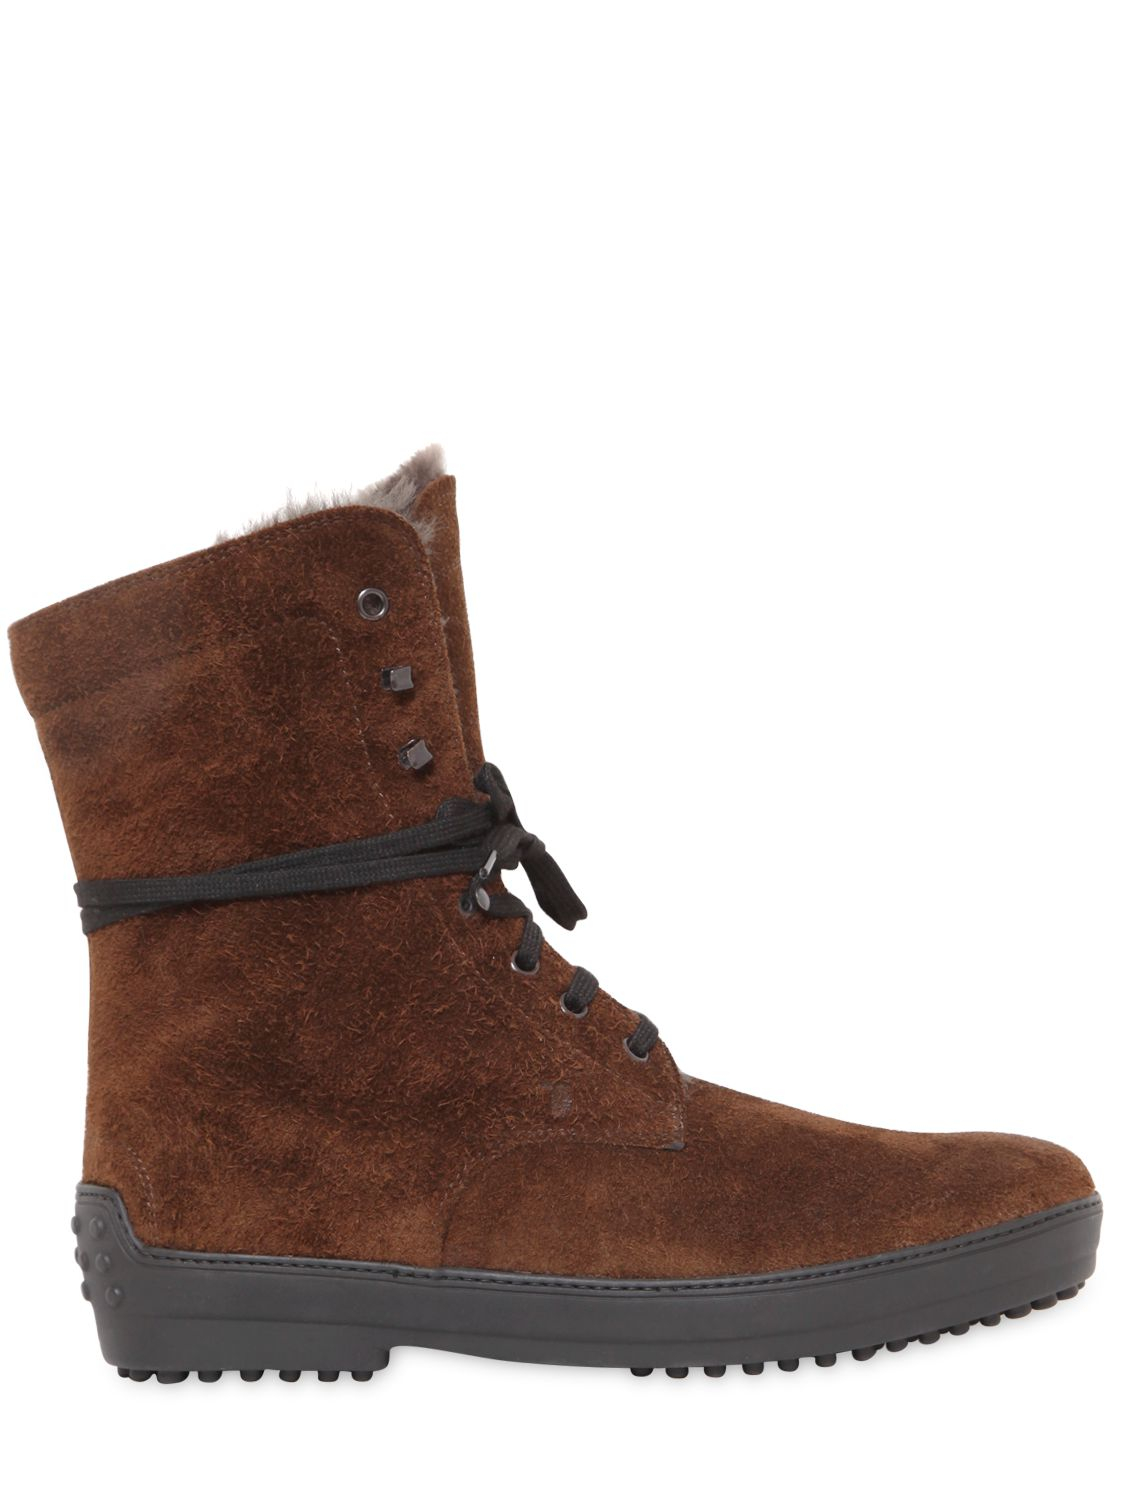 Lyst - Tod'S Shearling Lace-Up Boots in Brown for Men